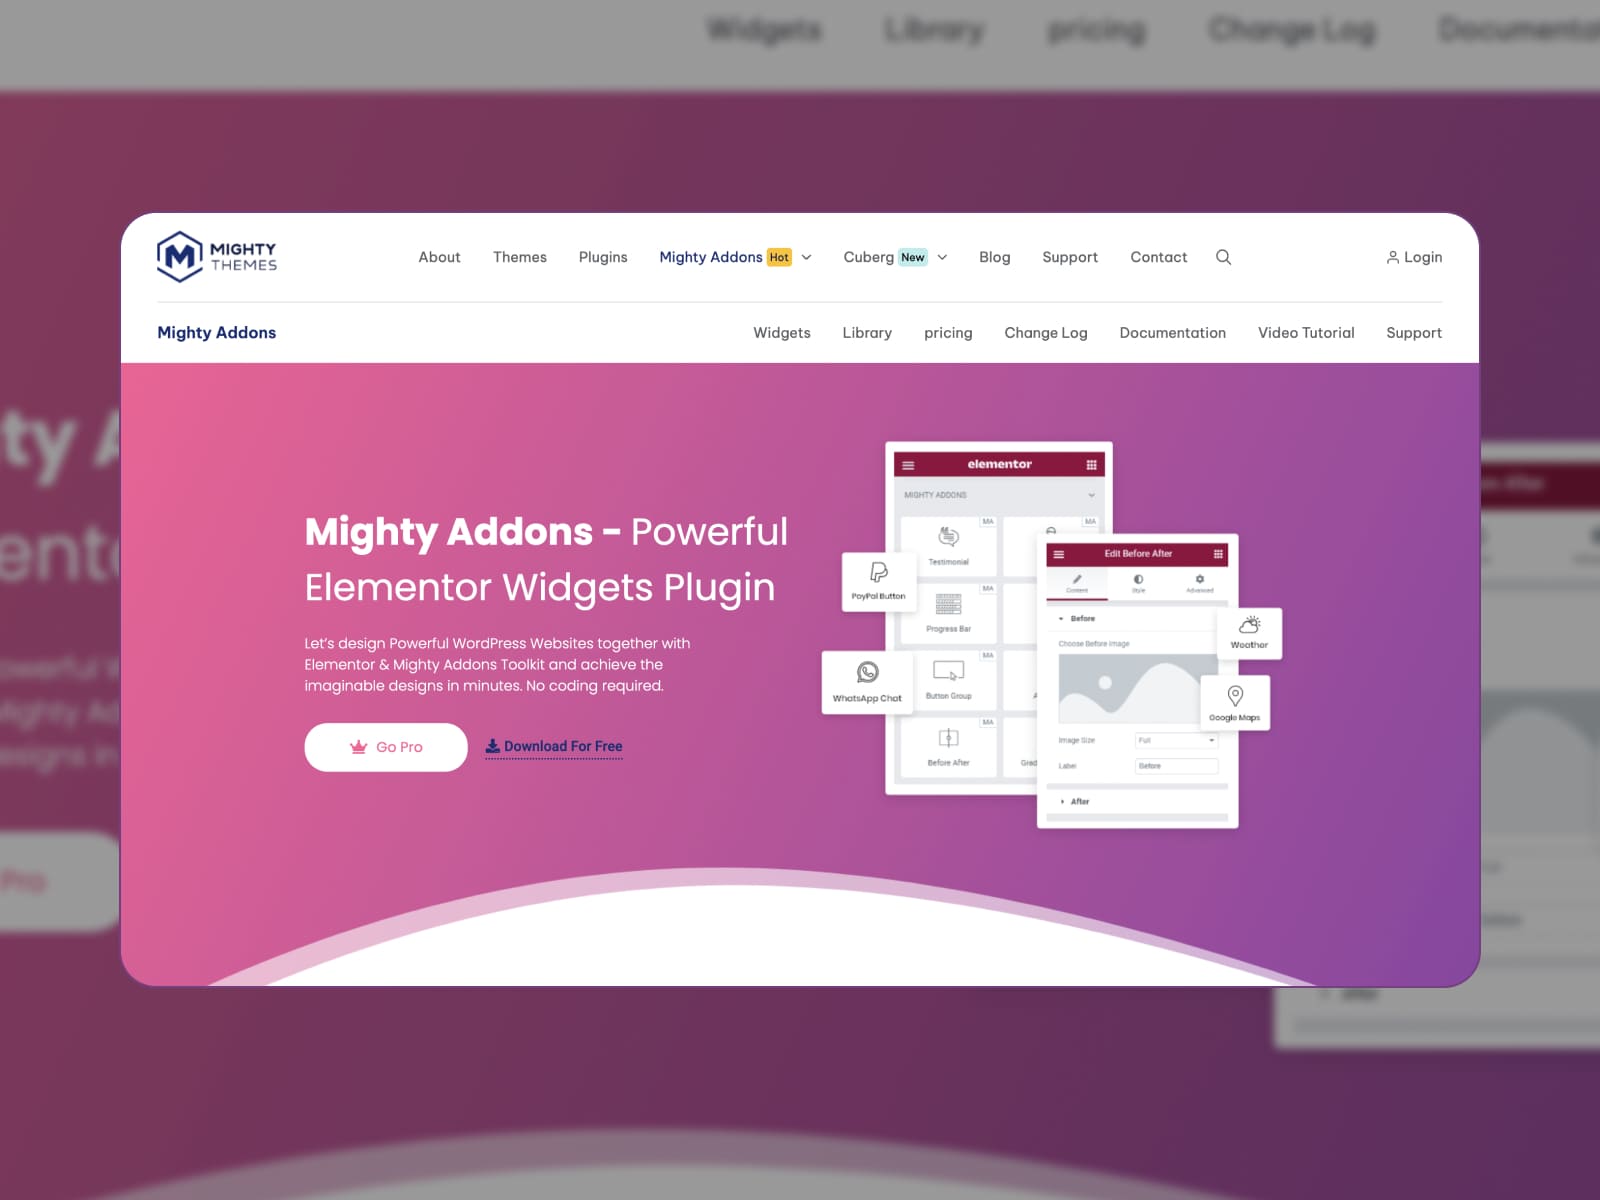 The Mighty Addons for Elementor landing page.